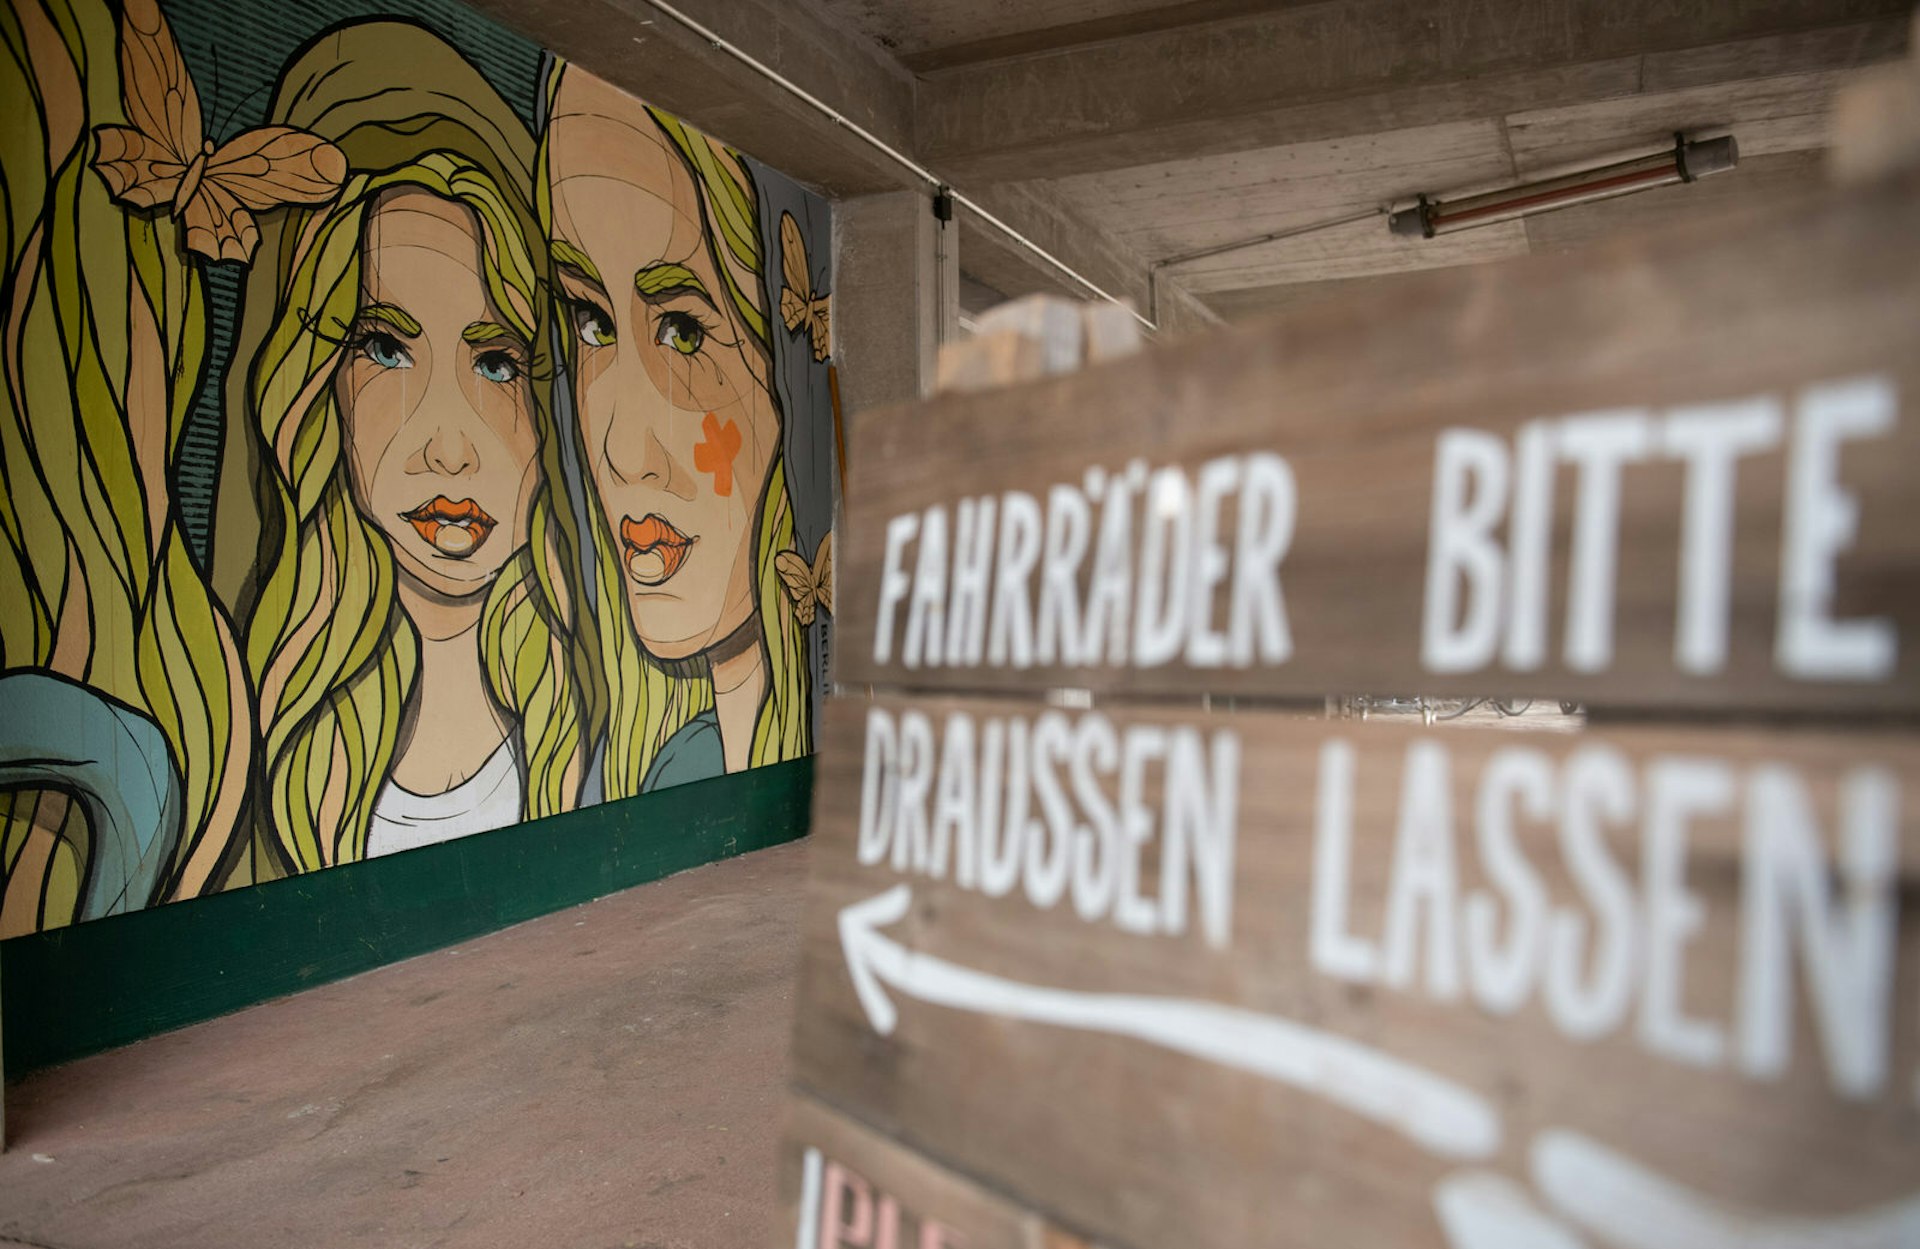 Free Berlin - Street art artist El Bocho painted an artwork inside an underpass at the Holzmarktstrasse. The artwork is part of the 'Berlin Mural Fest'. Artists designed numerous facades in the city according to their ideas. The image is of two blonde female faces, with bold linework on a teal background.